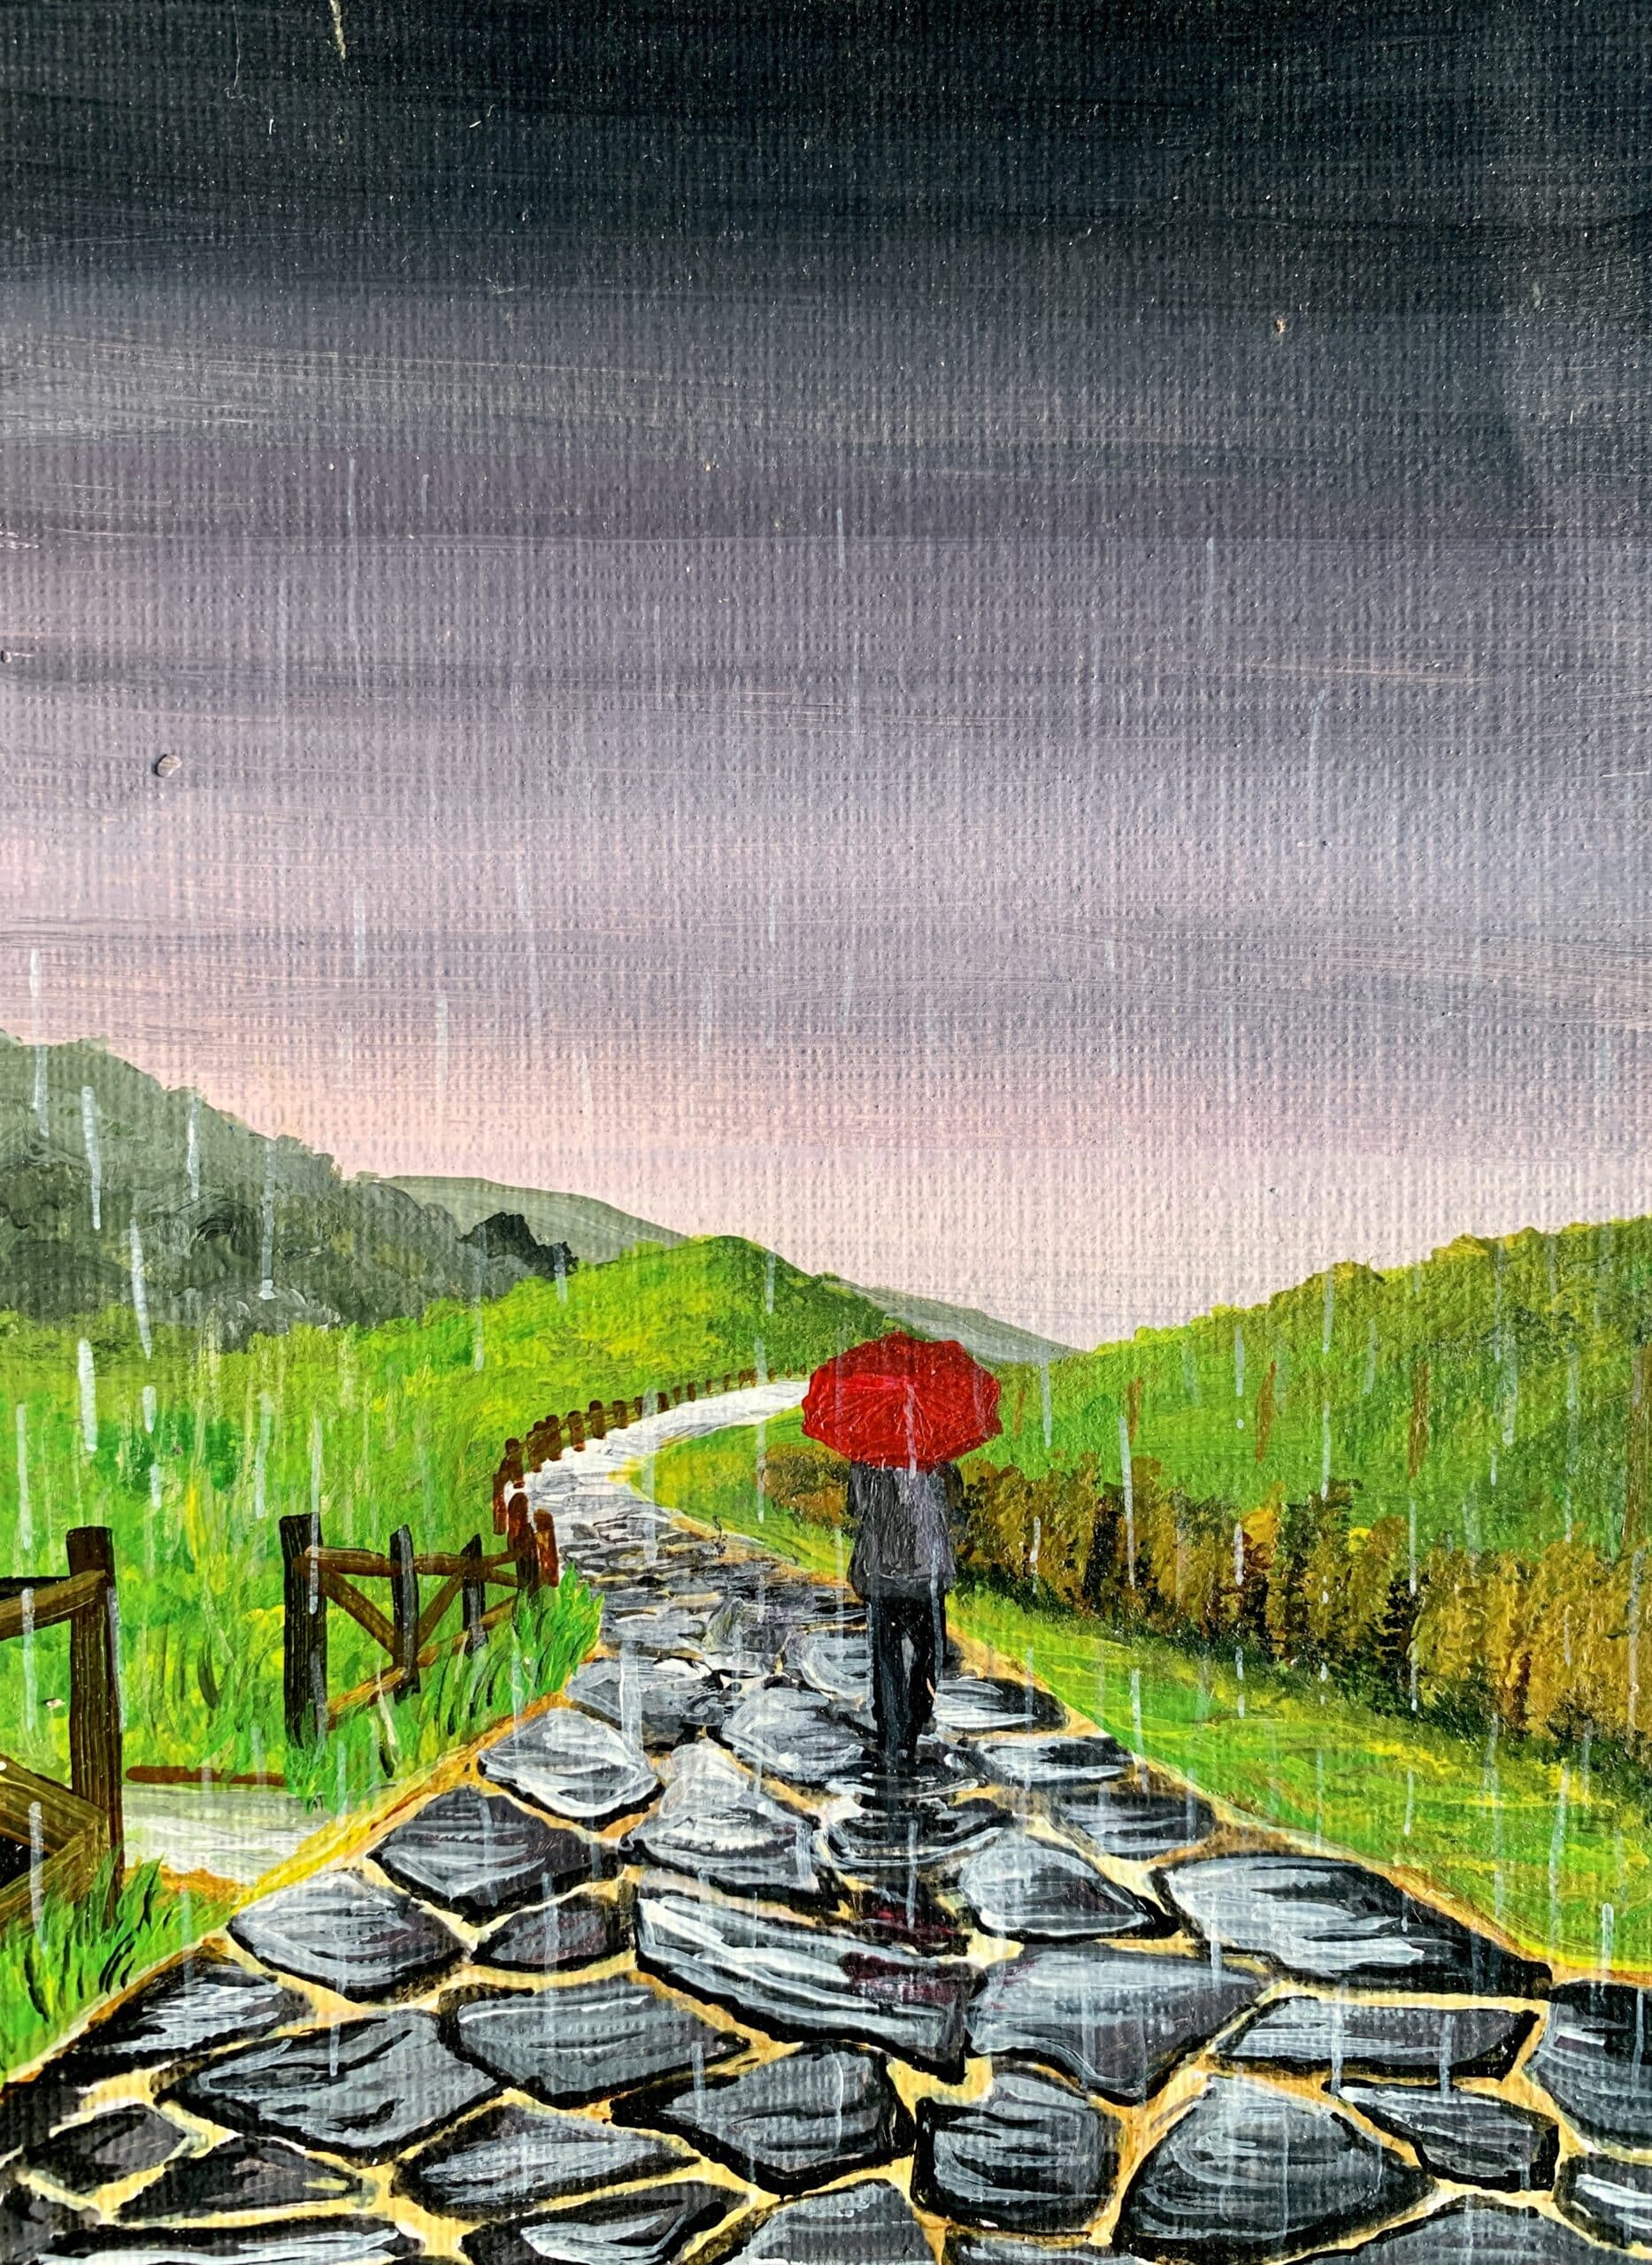 Buy Rainy Scene in a Village Artwork at Lowest Price By Dipali Deshpande